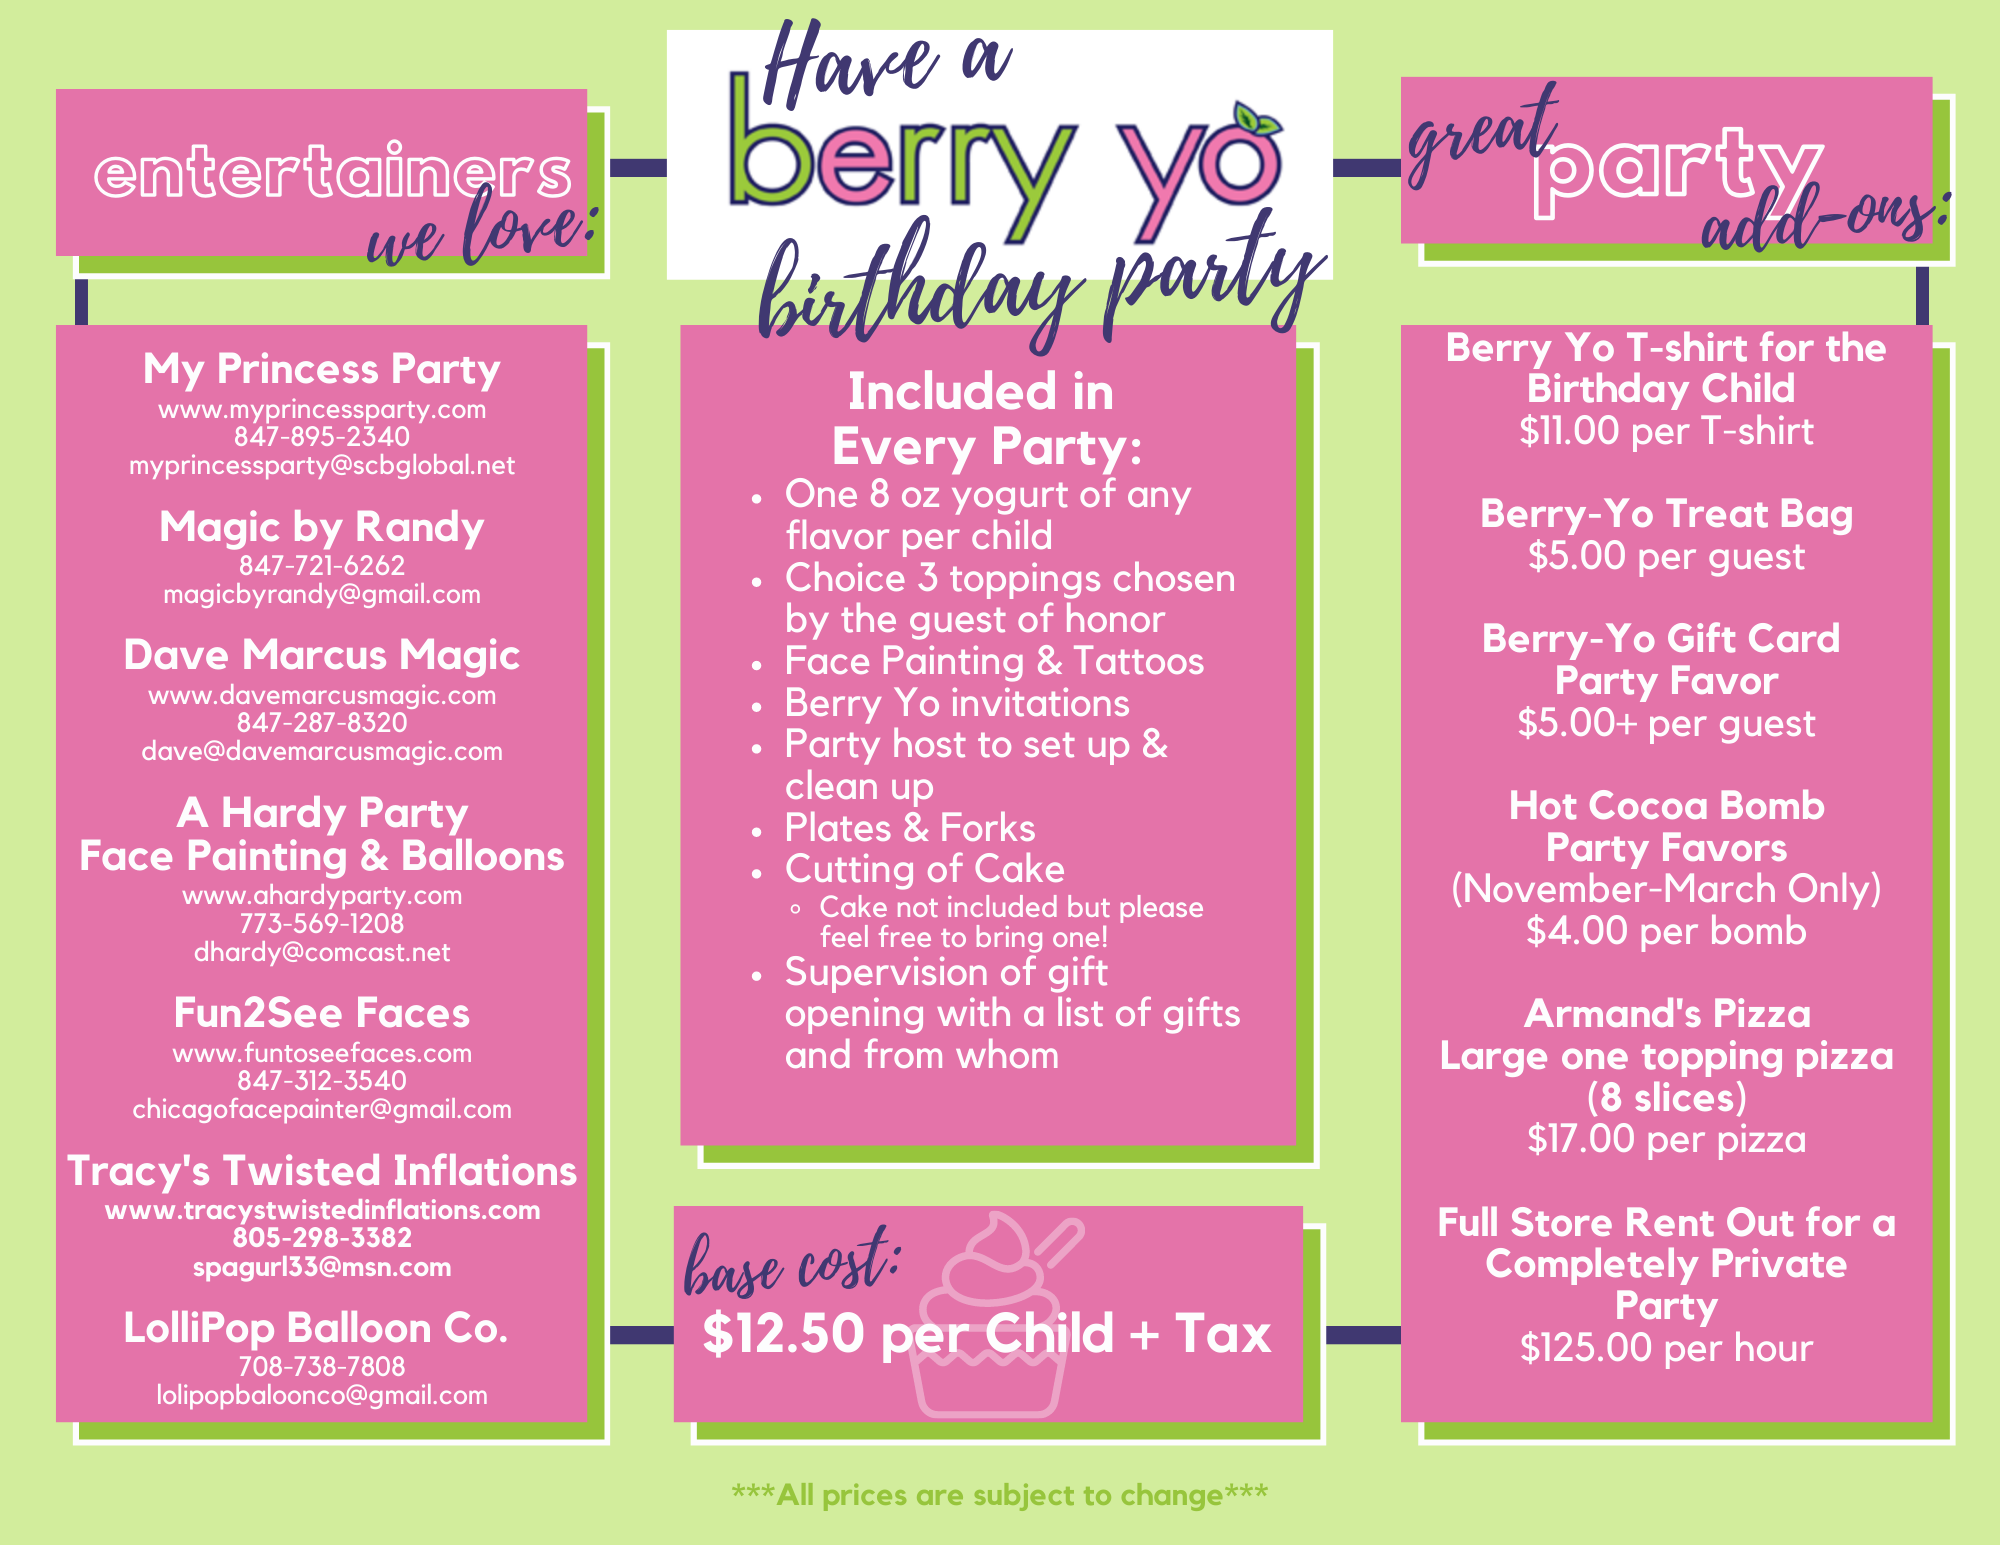 http://berry-yo.com/wp-content/uploads/2012/05/Page-2-of-Brochure.png